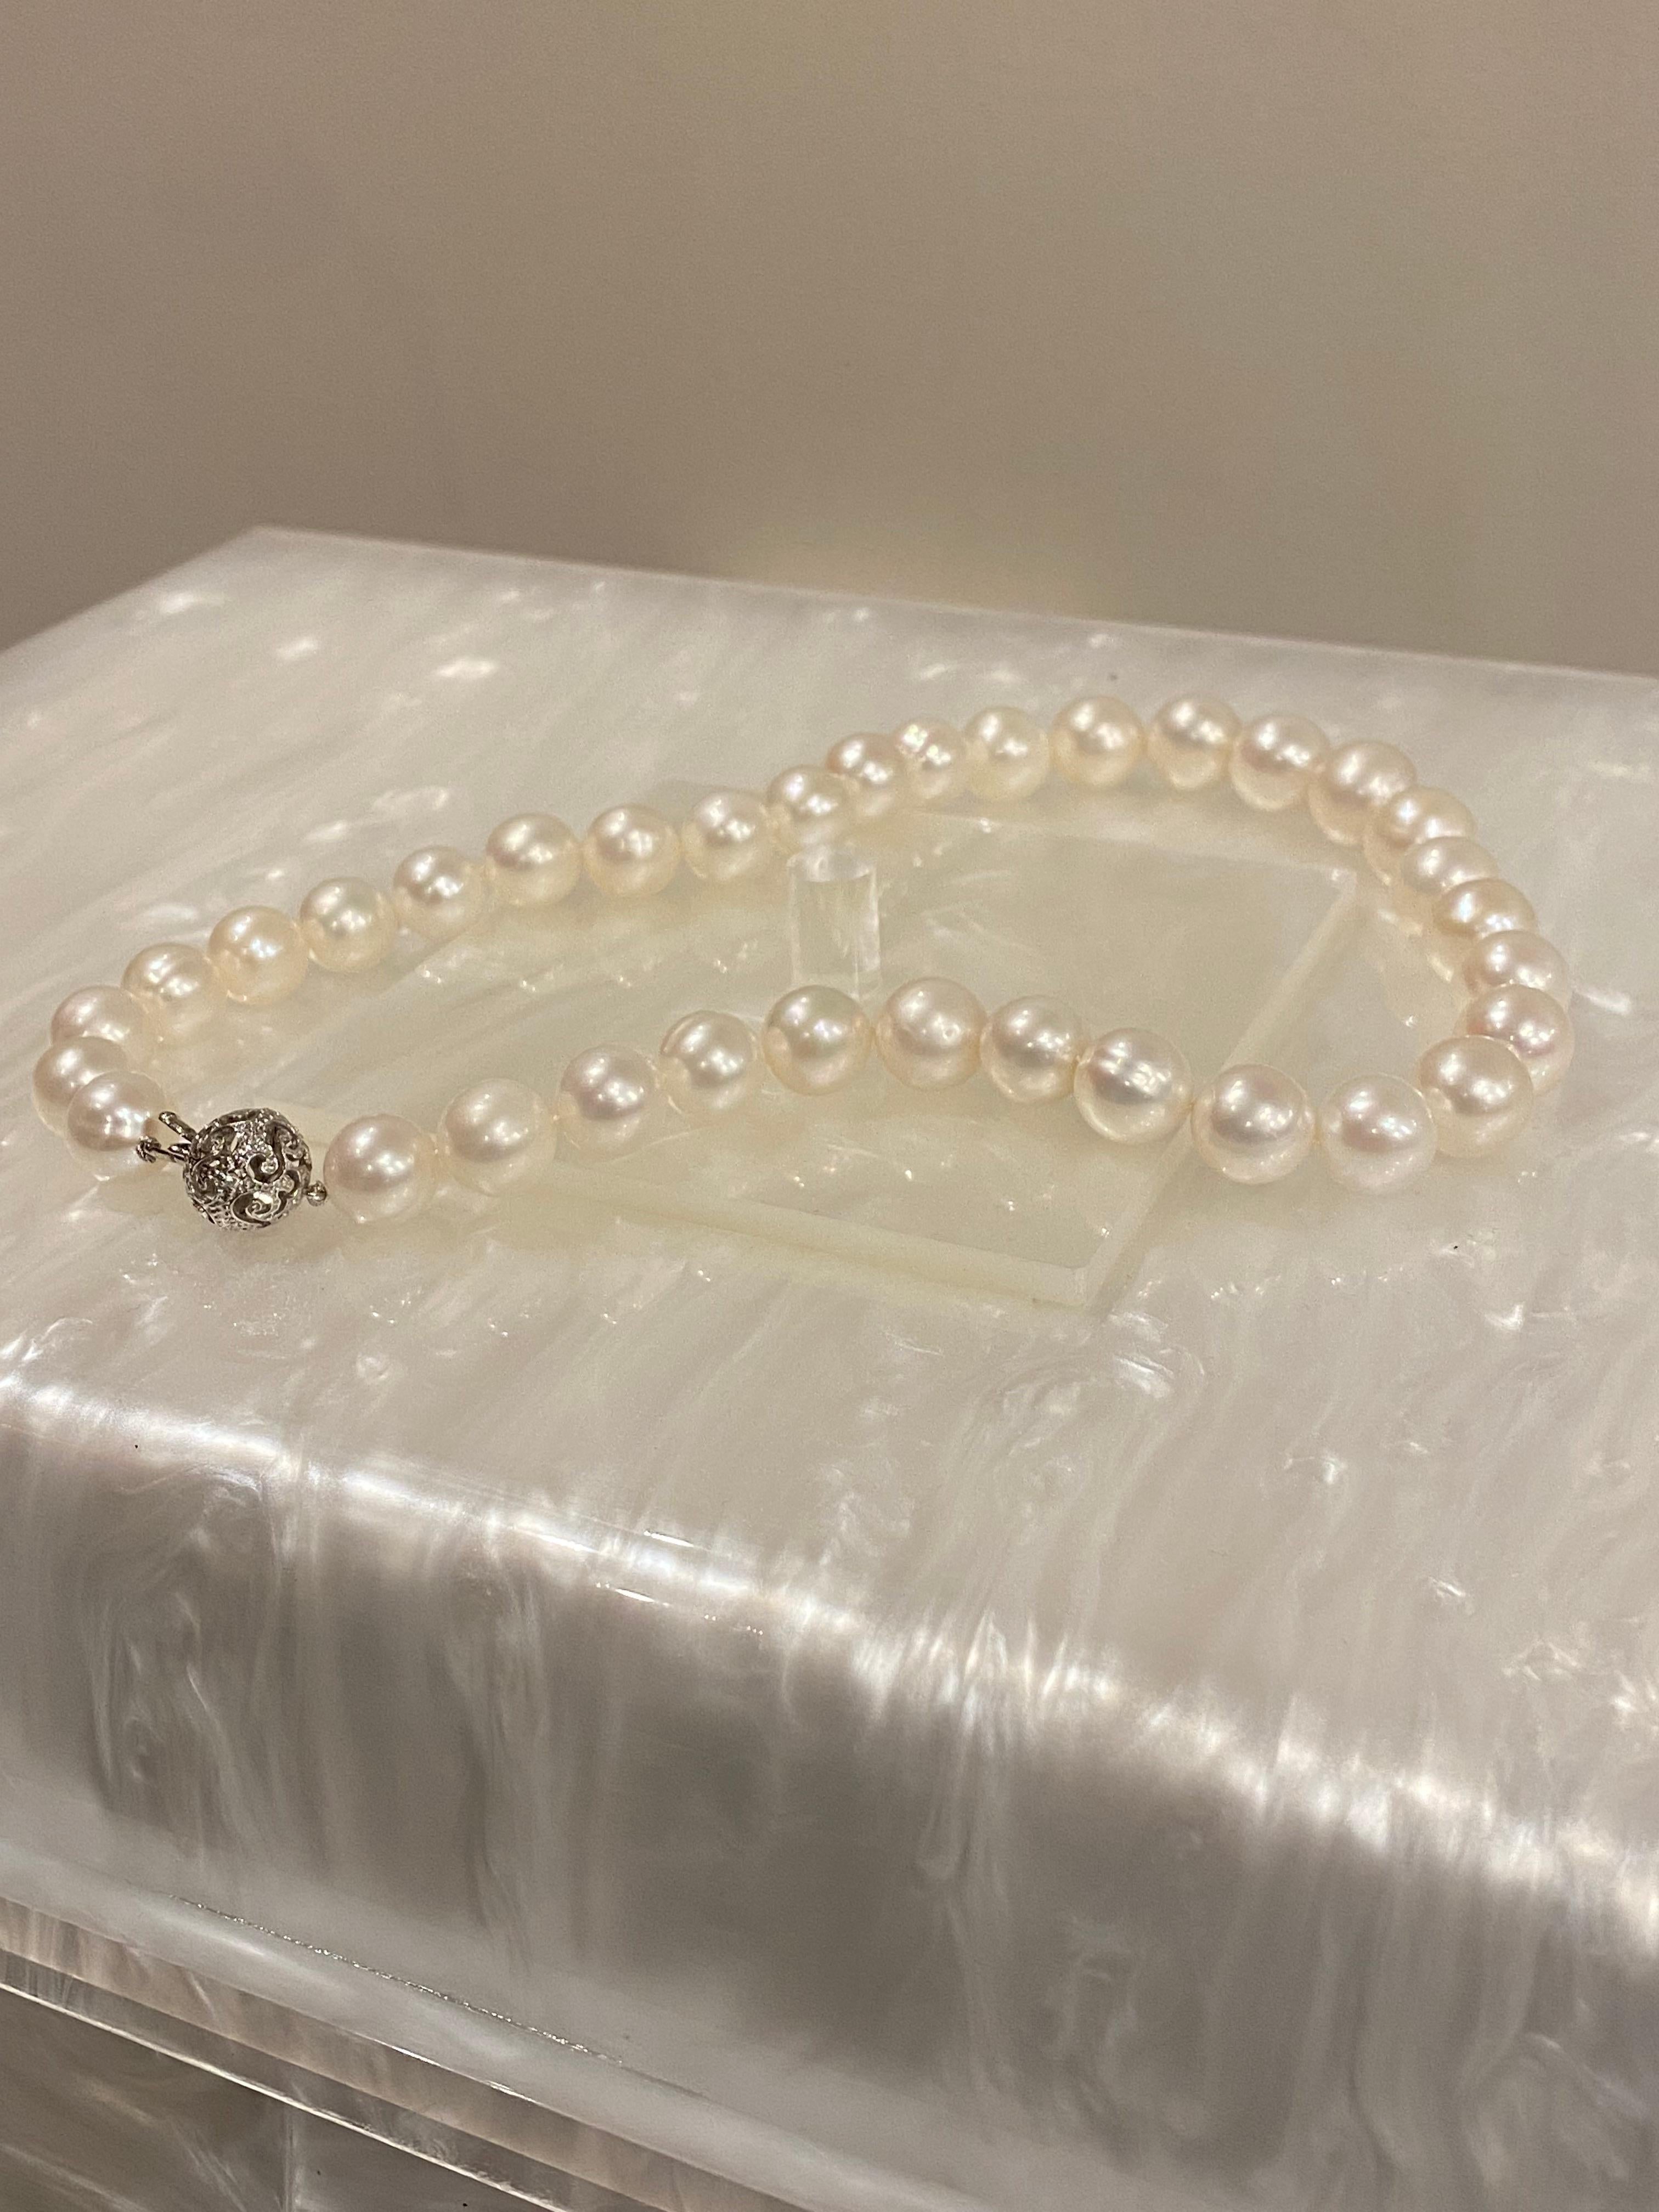 Single continuous strand, 
comprising 34 impressively large Cultured Pearls, 
graduating from 11.2mm to 13.8mm 
of fine mirror-like luster & stunning radiant chalky cream / ivory overtone

each being individually knotted to white silk 

Necklace is